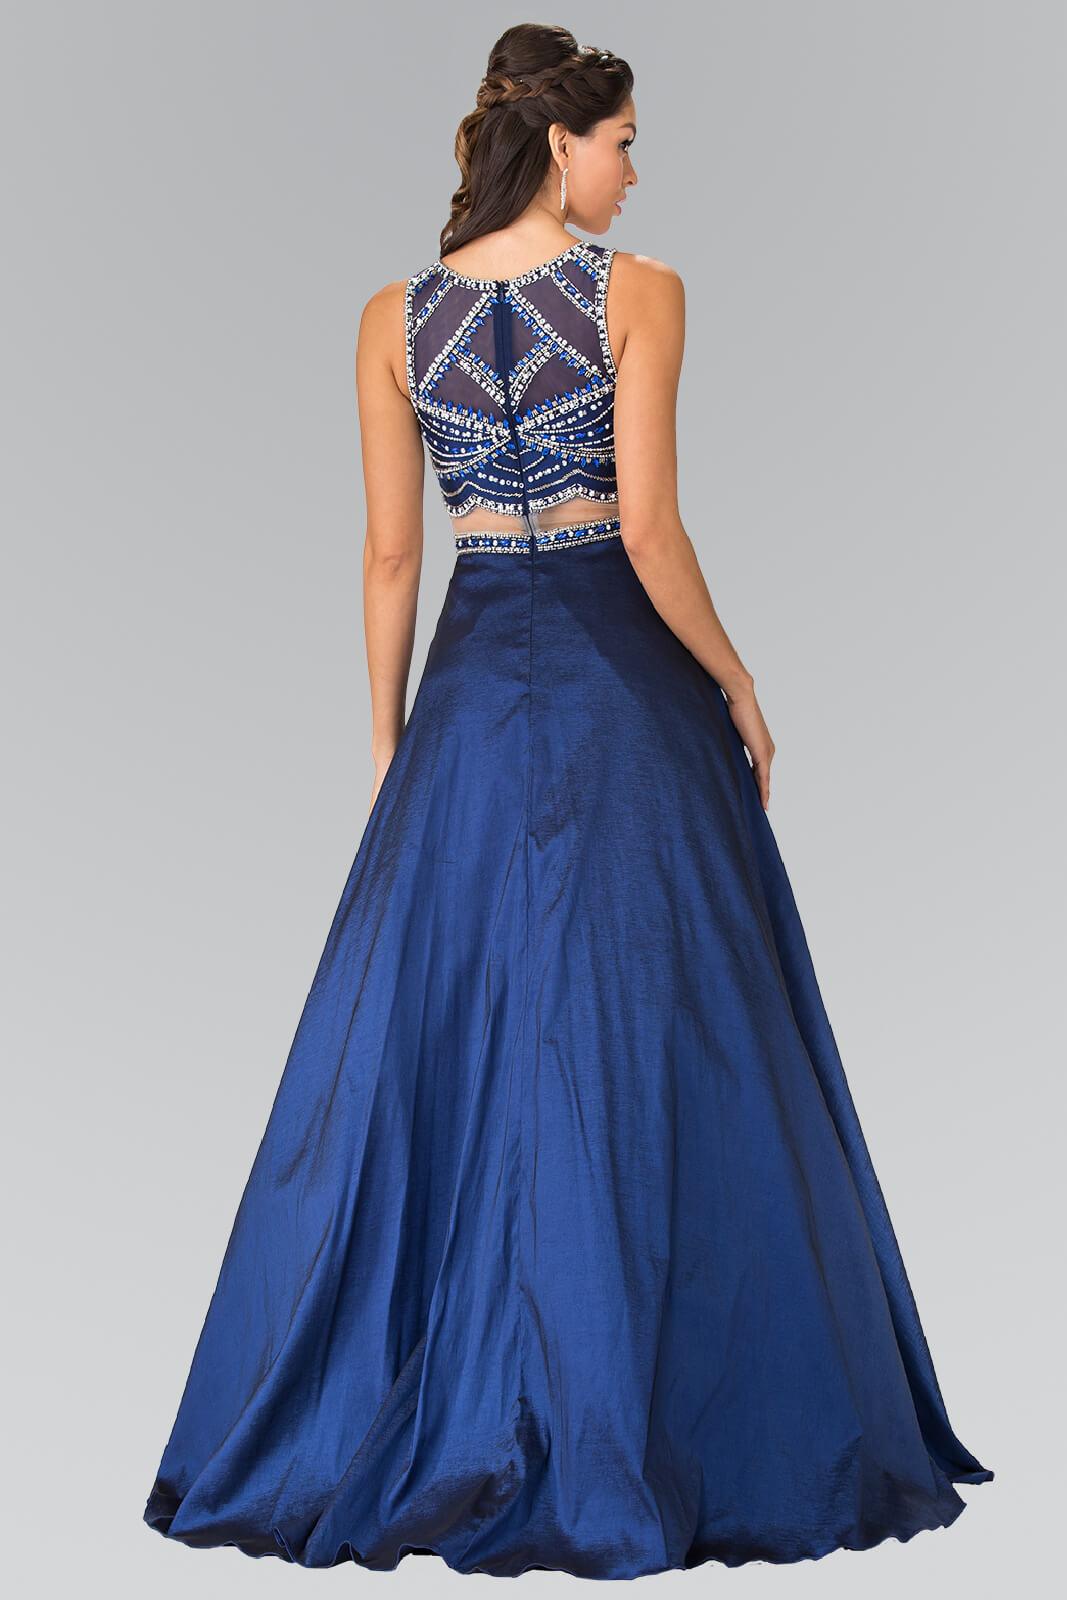 Two Piece Ball Gown Long Prom Dress - The Dress Outlet